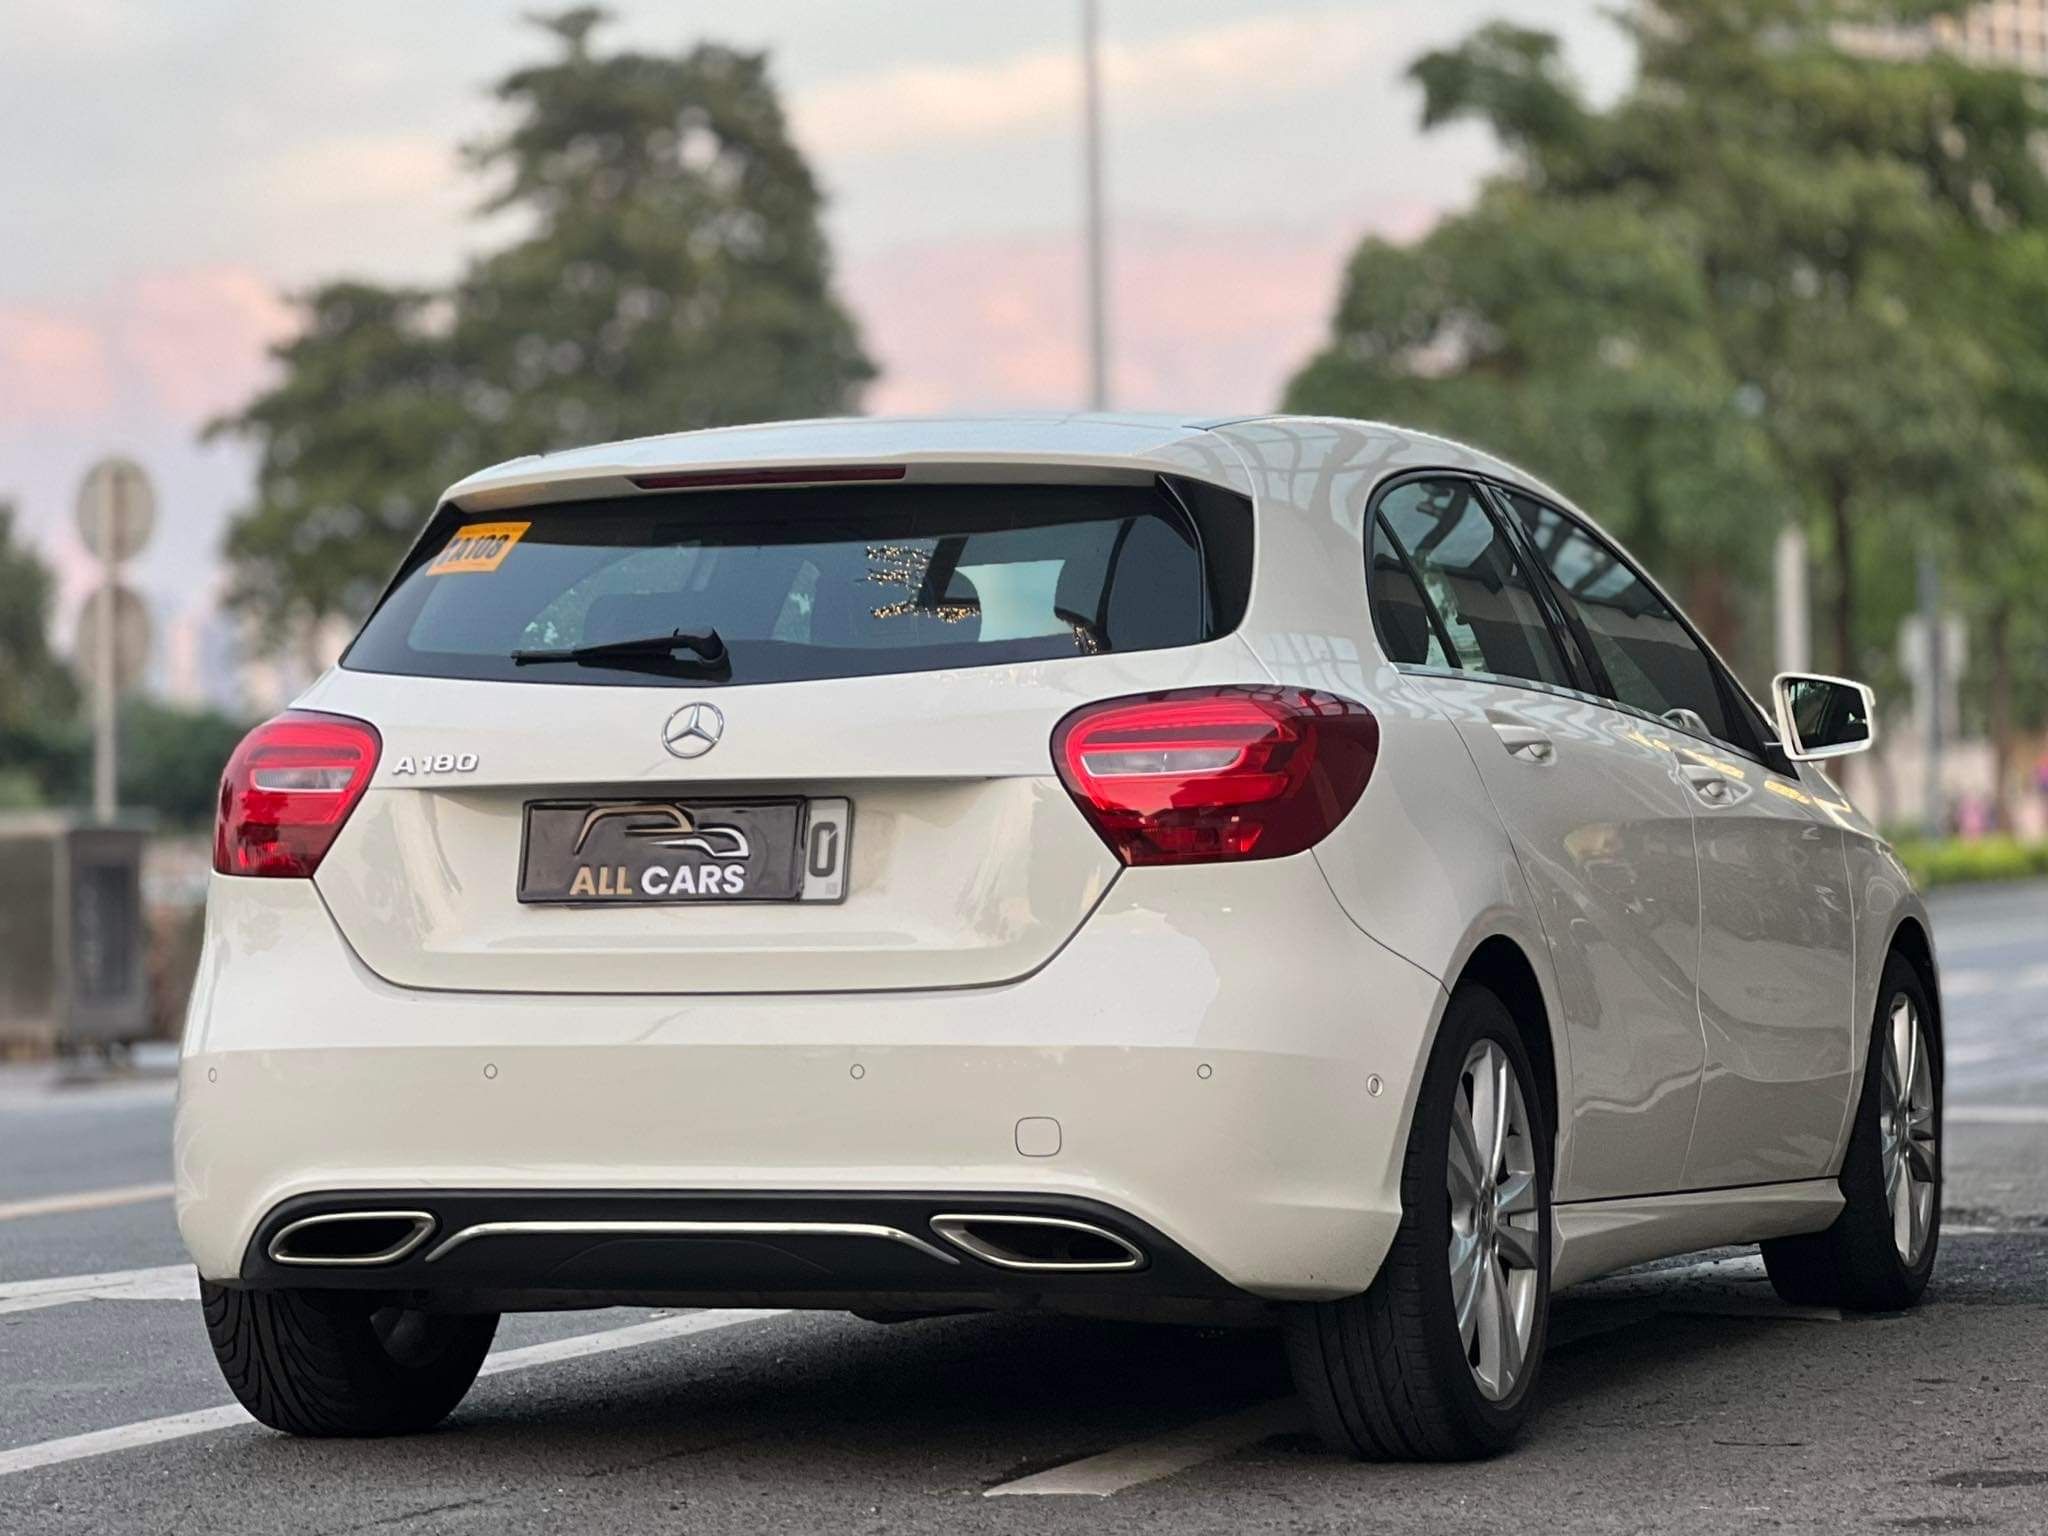 Old 2018 Mercedes-Benz A-Class 180 (automatic)